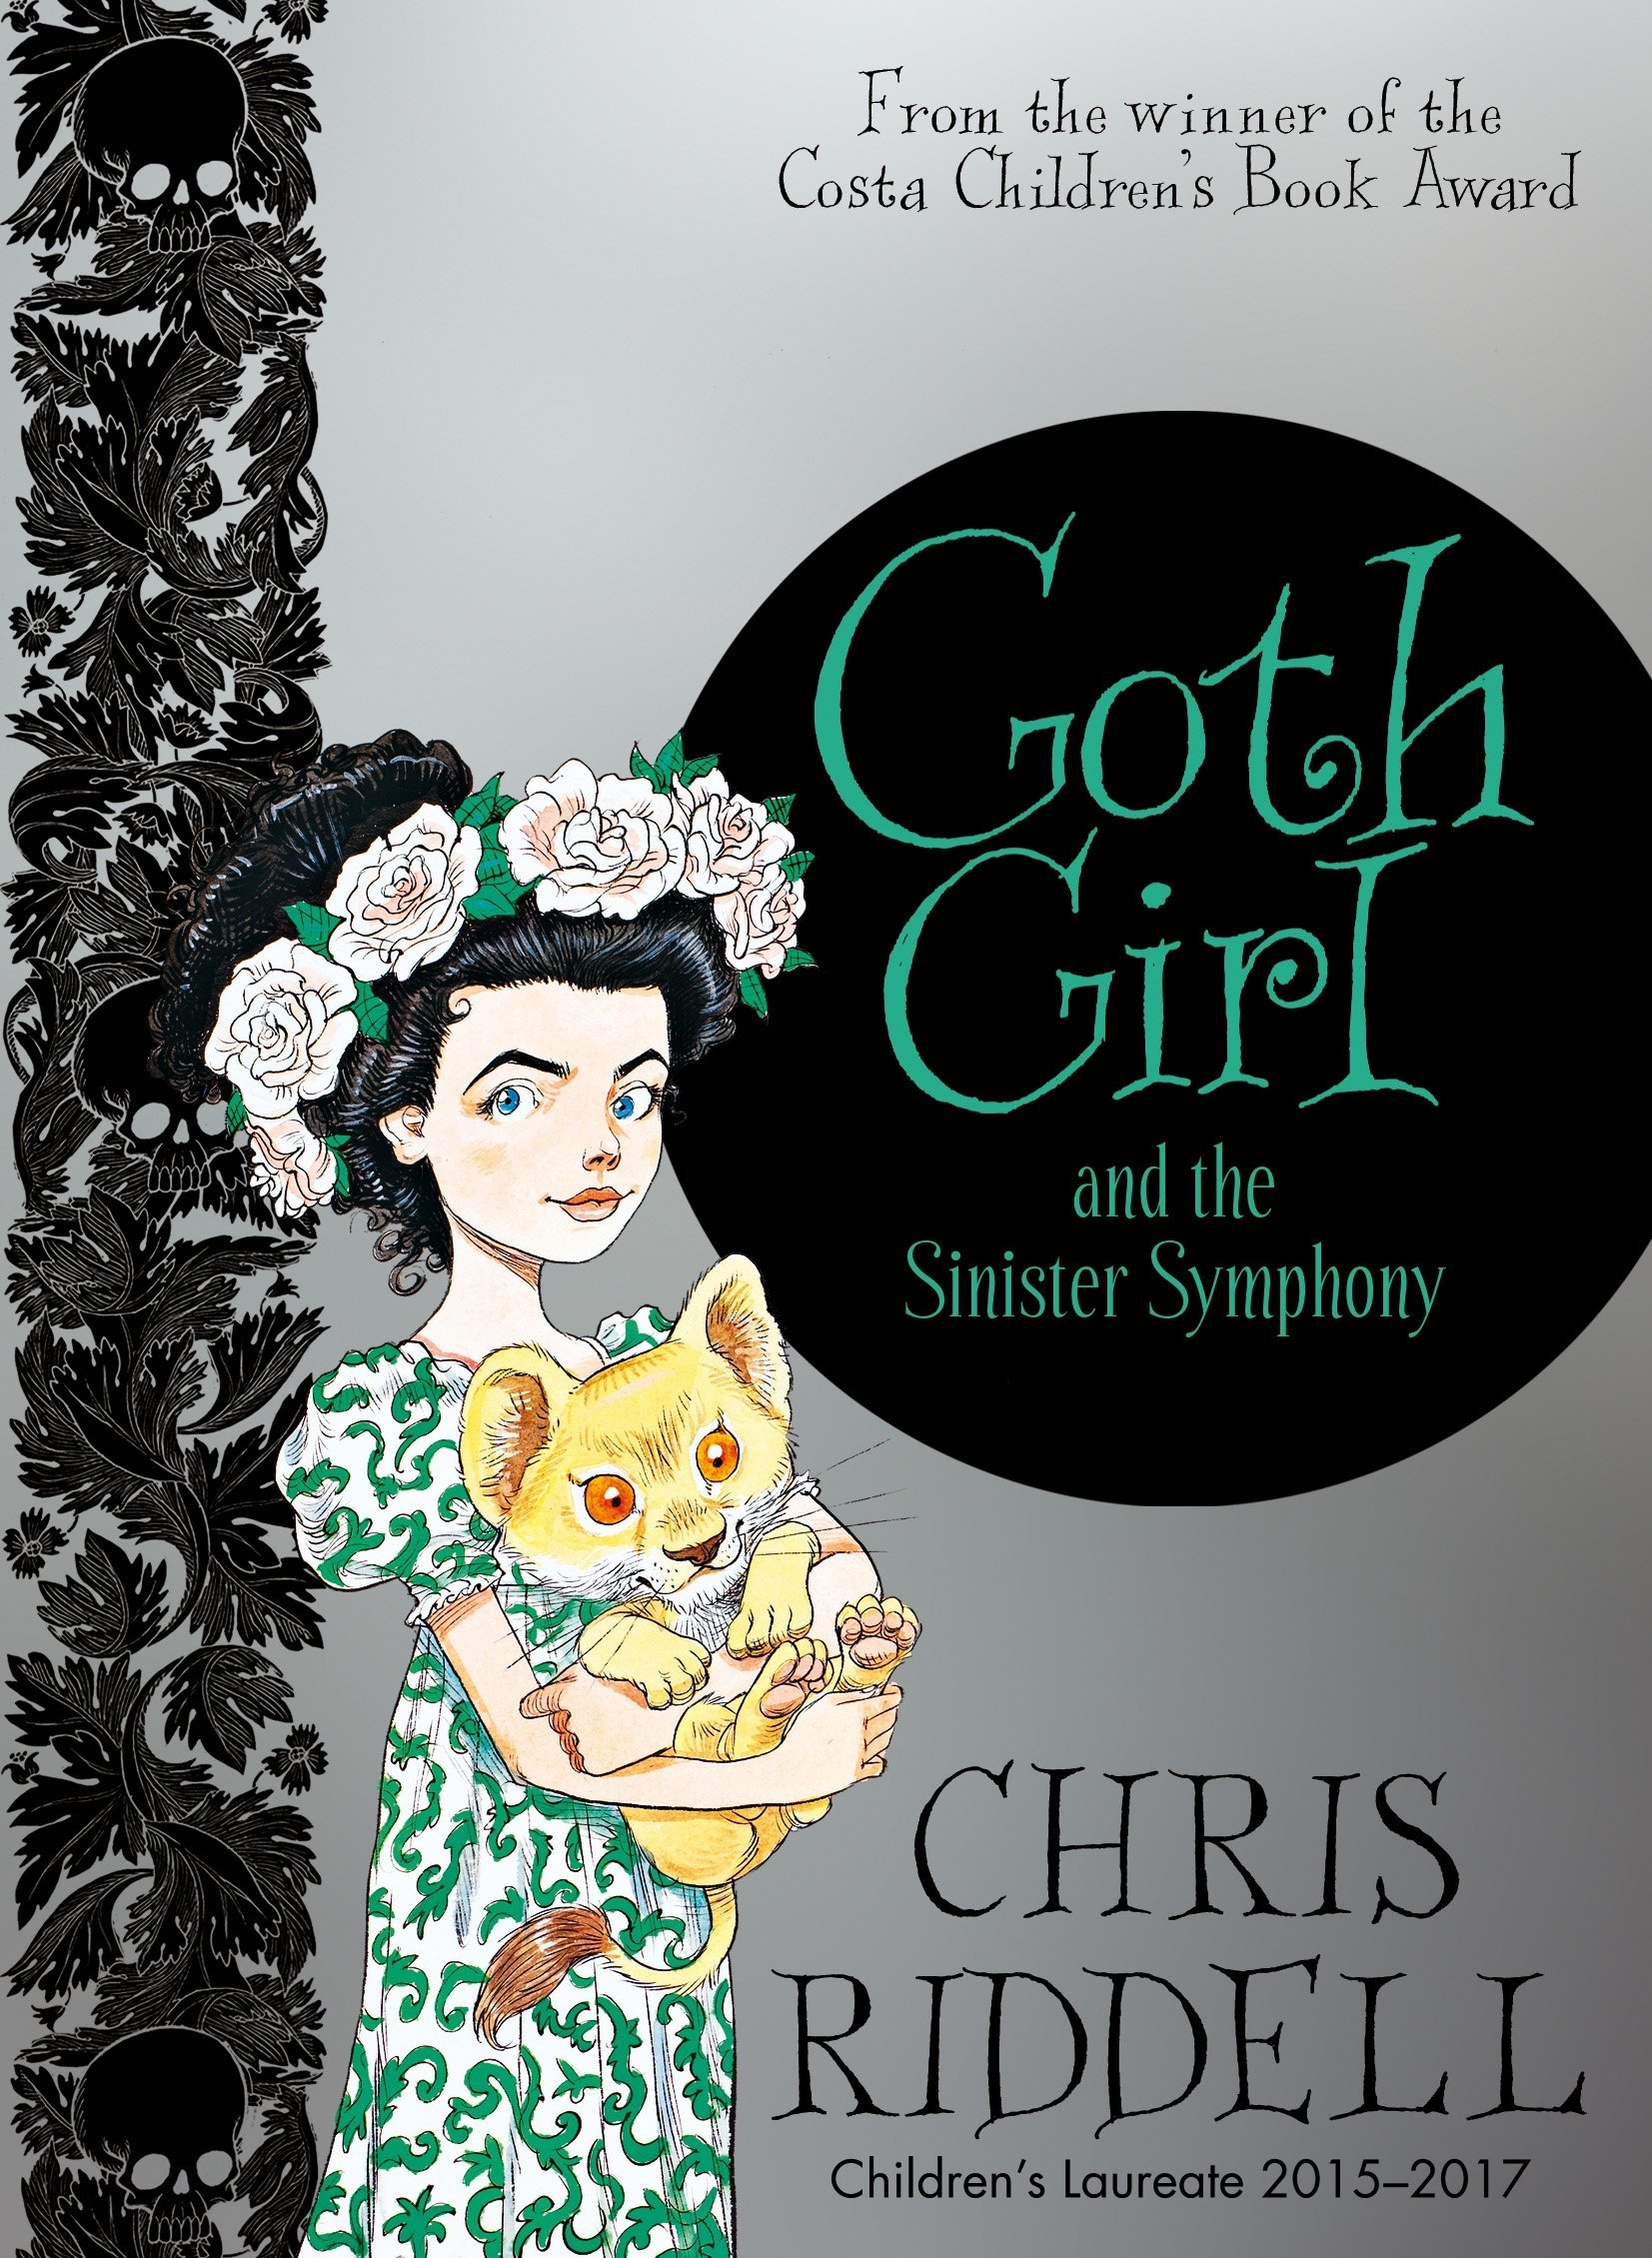 Chris Riddell: Goth girl and the sinister symphony (2017, Pan Macmillan)